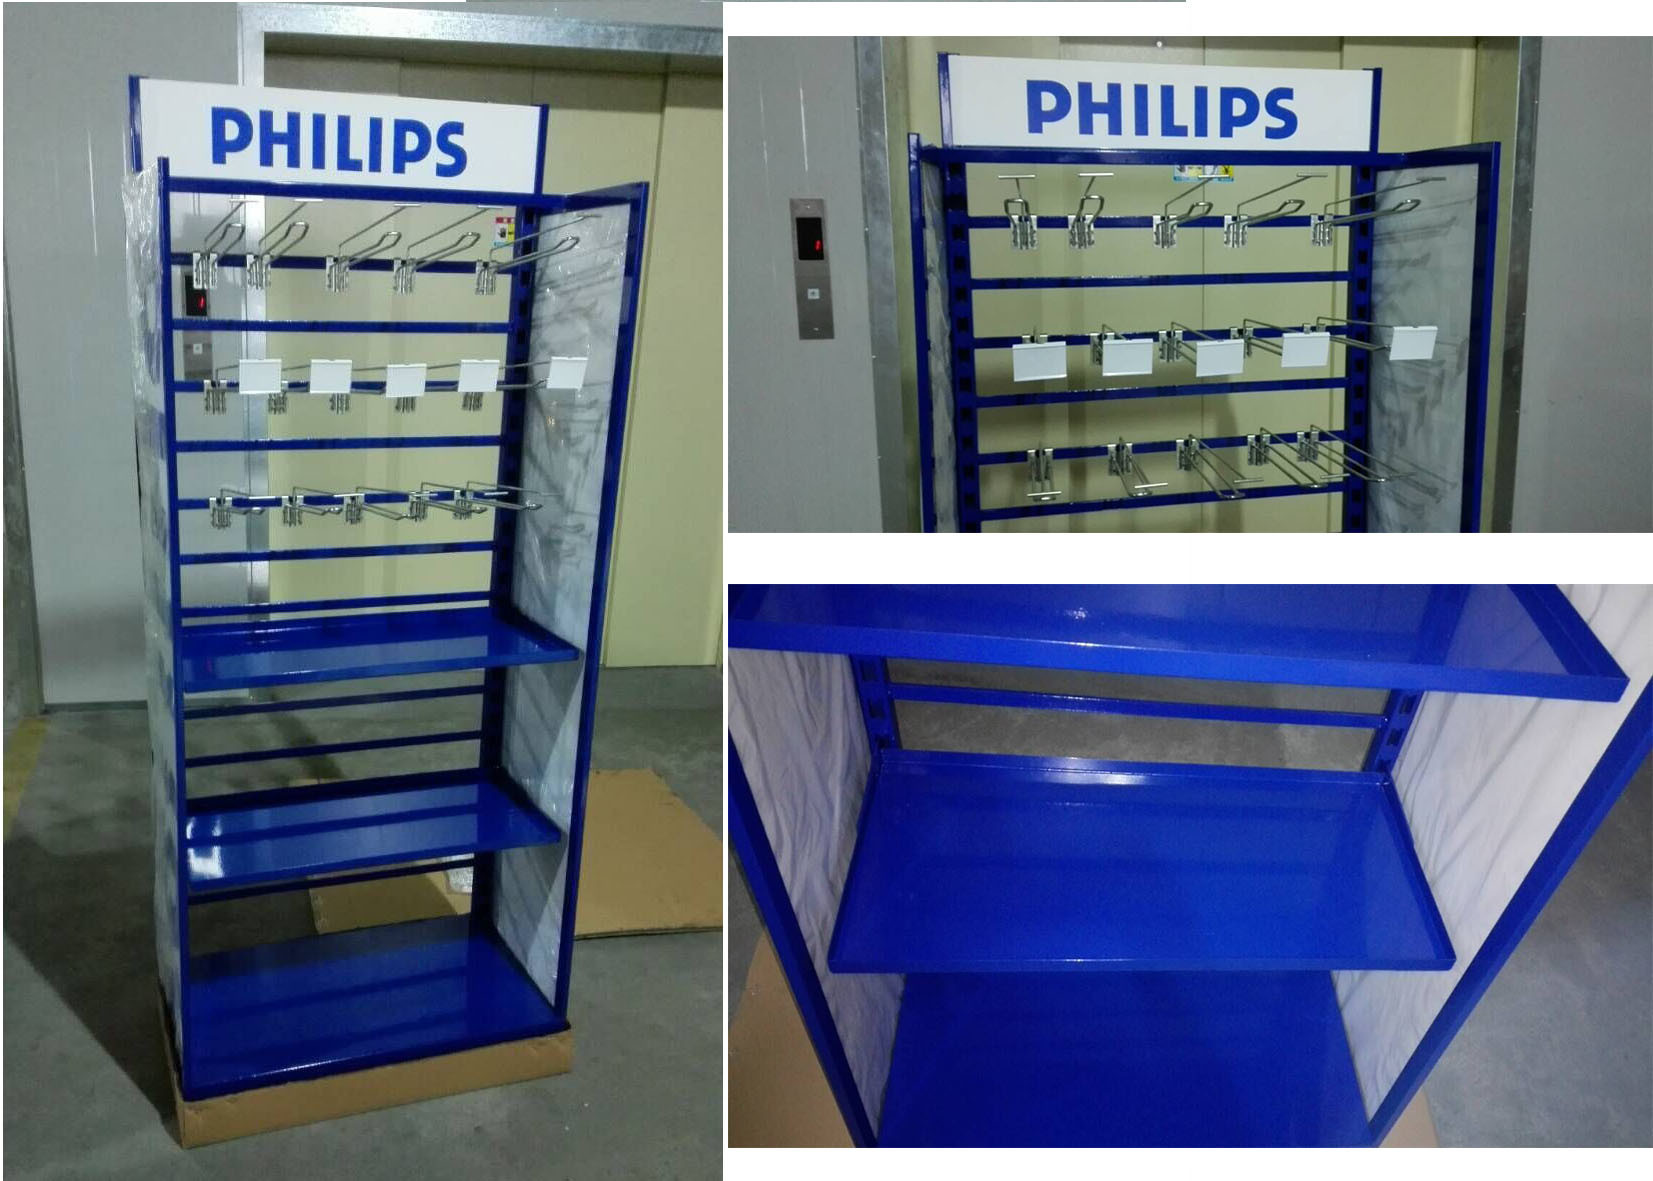  Metal Tube Frame Branded Display Stands With Customized Graphic Sign Versatility Manufactures